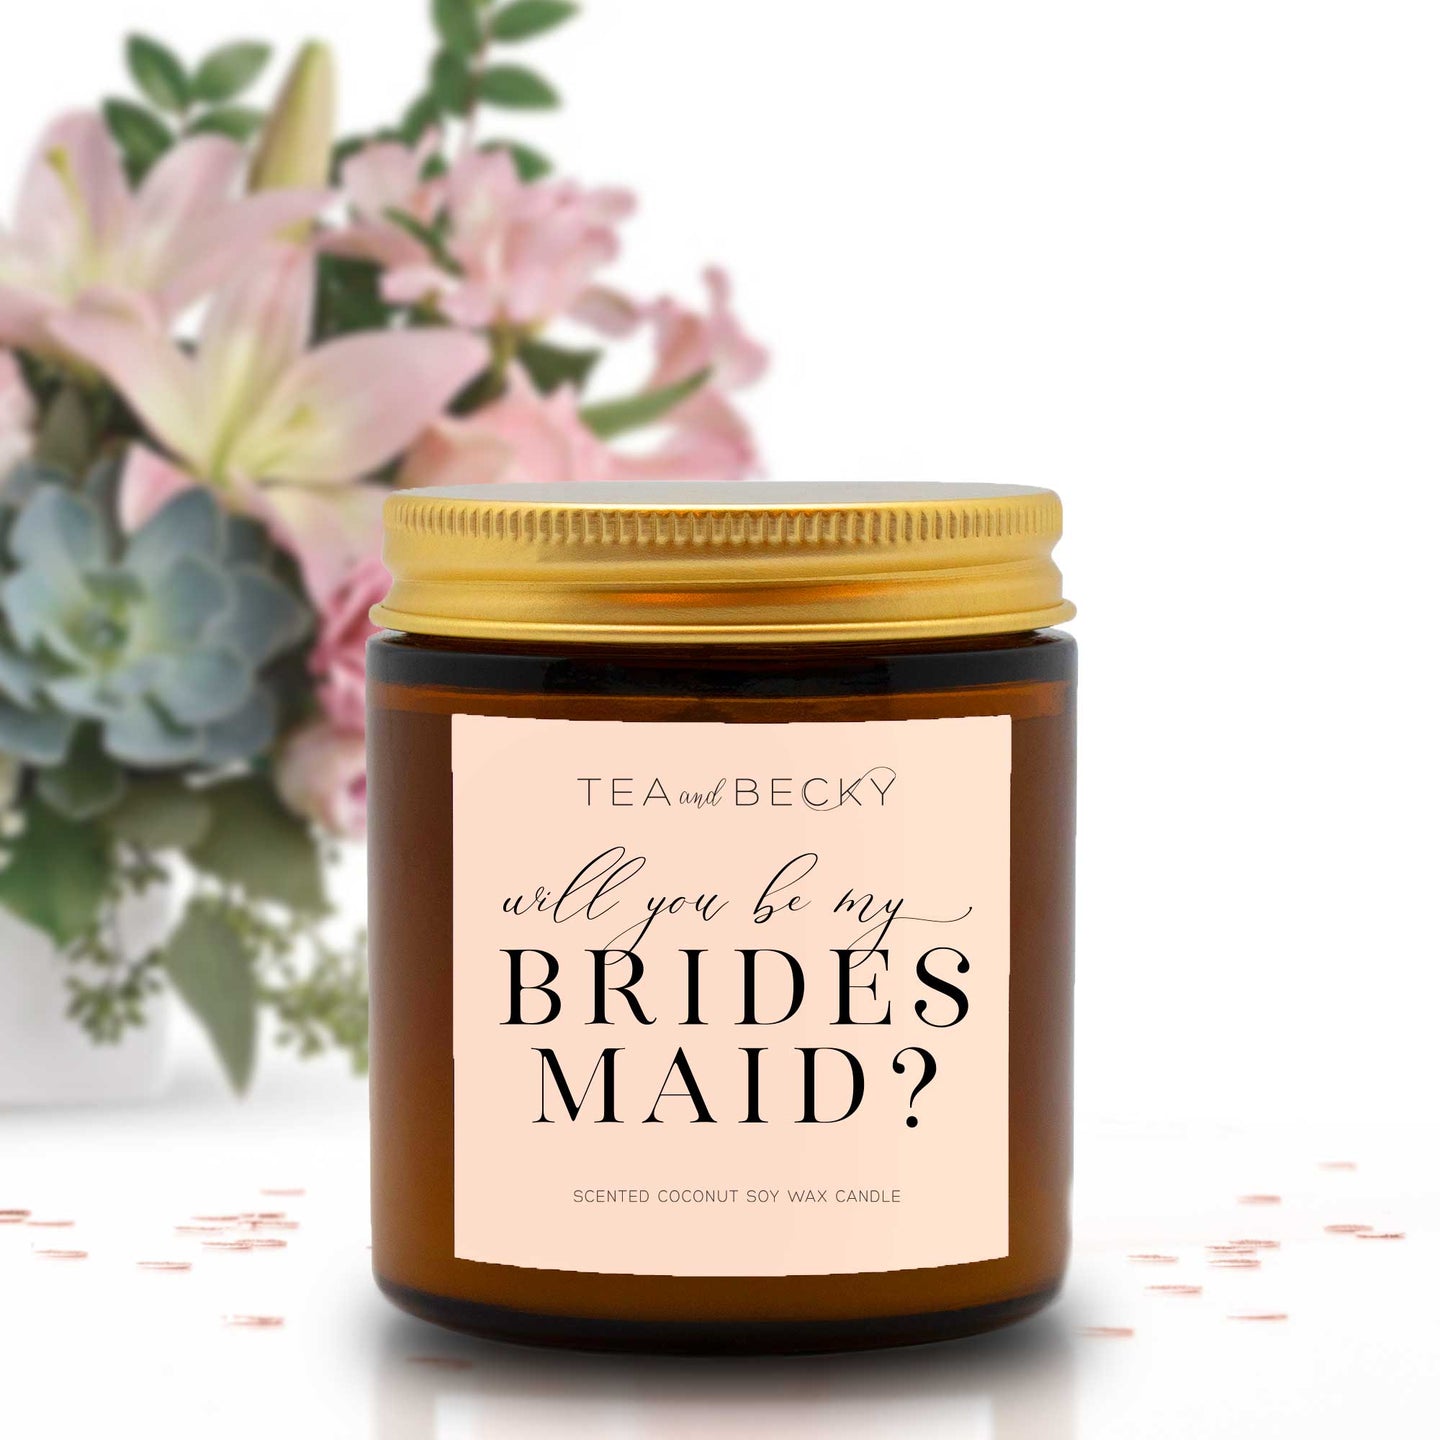 Will You Be My Bridesmaid Scented Candle Amber Jar 4oz - More colors